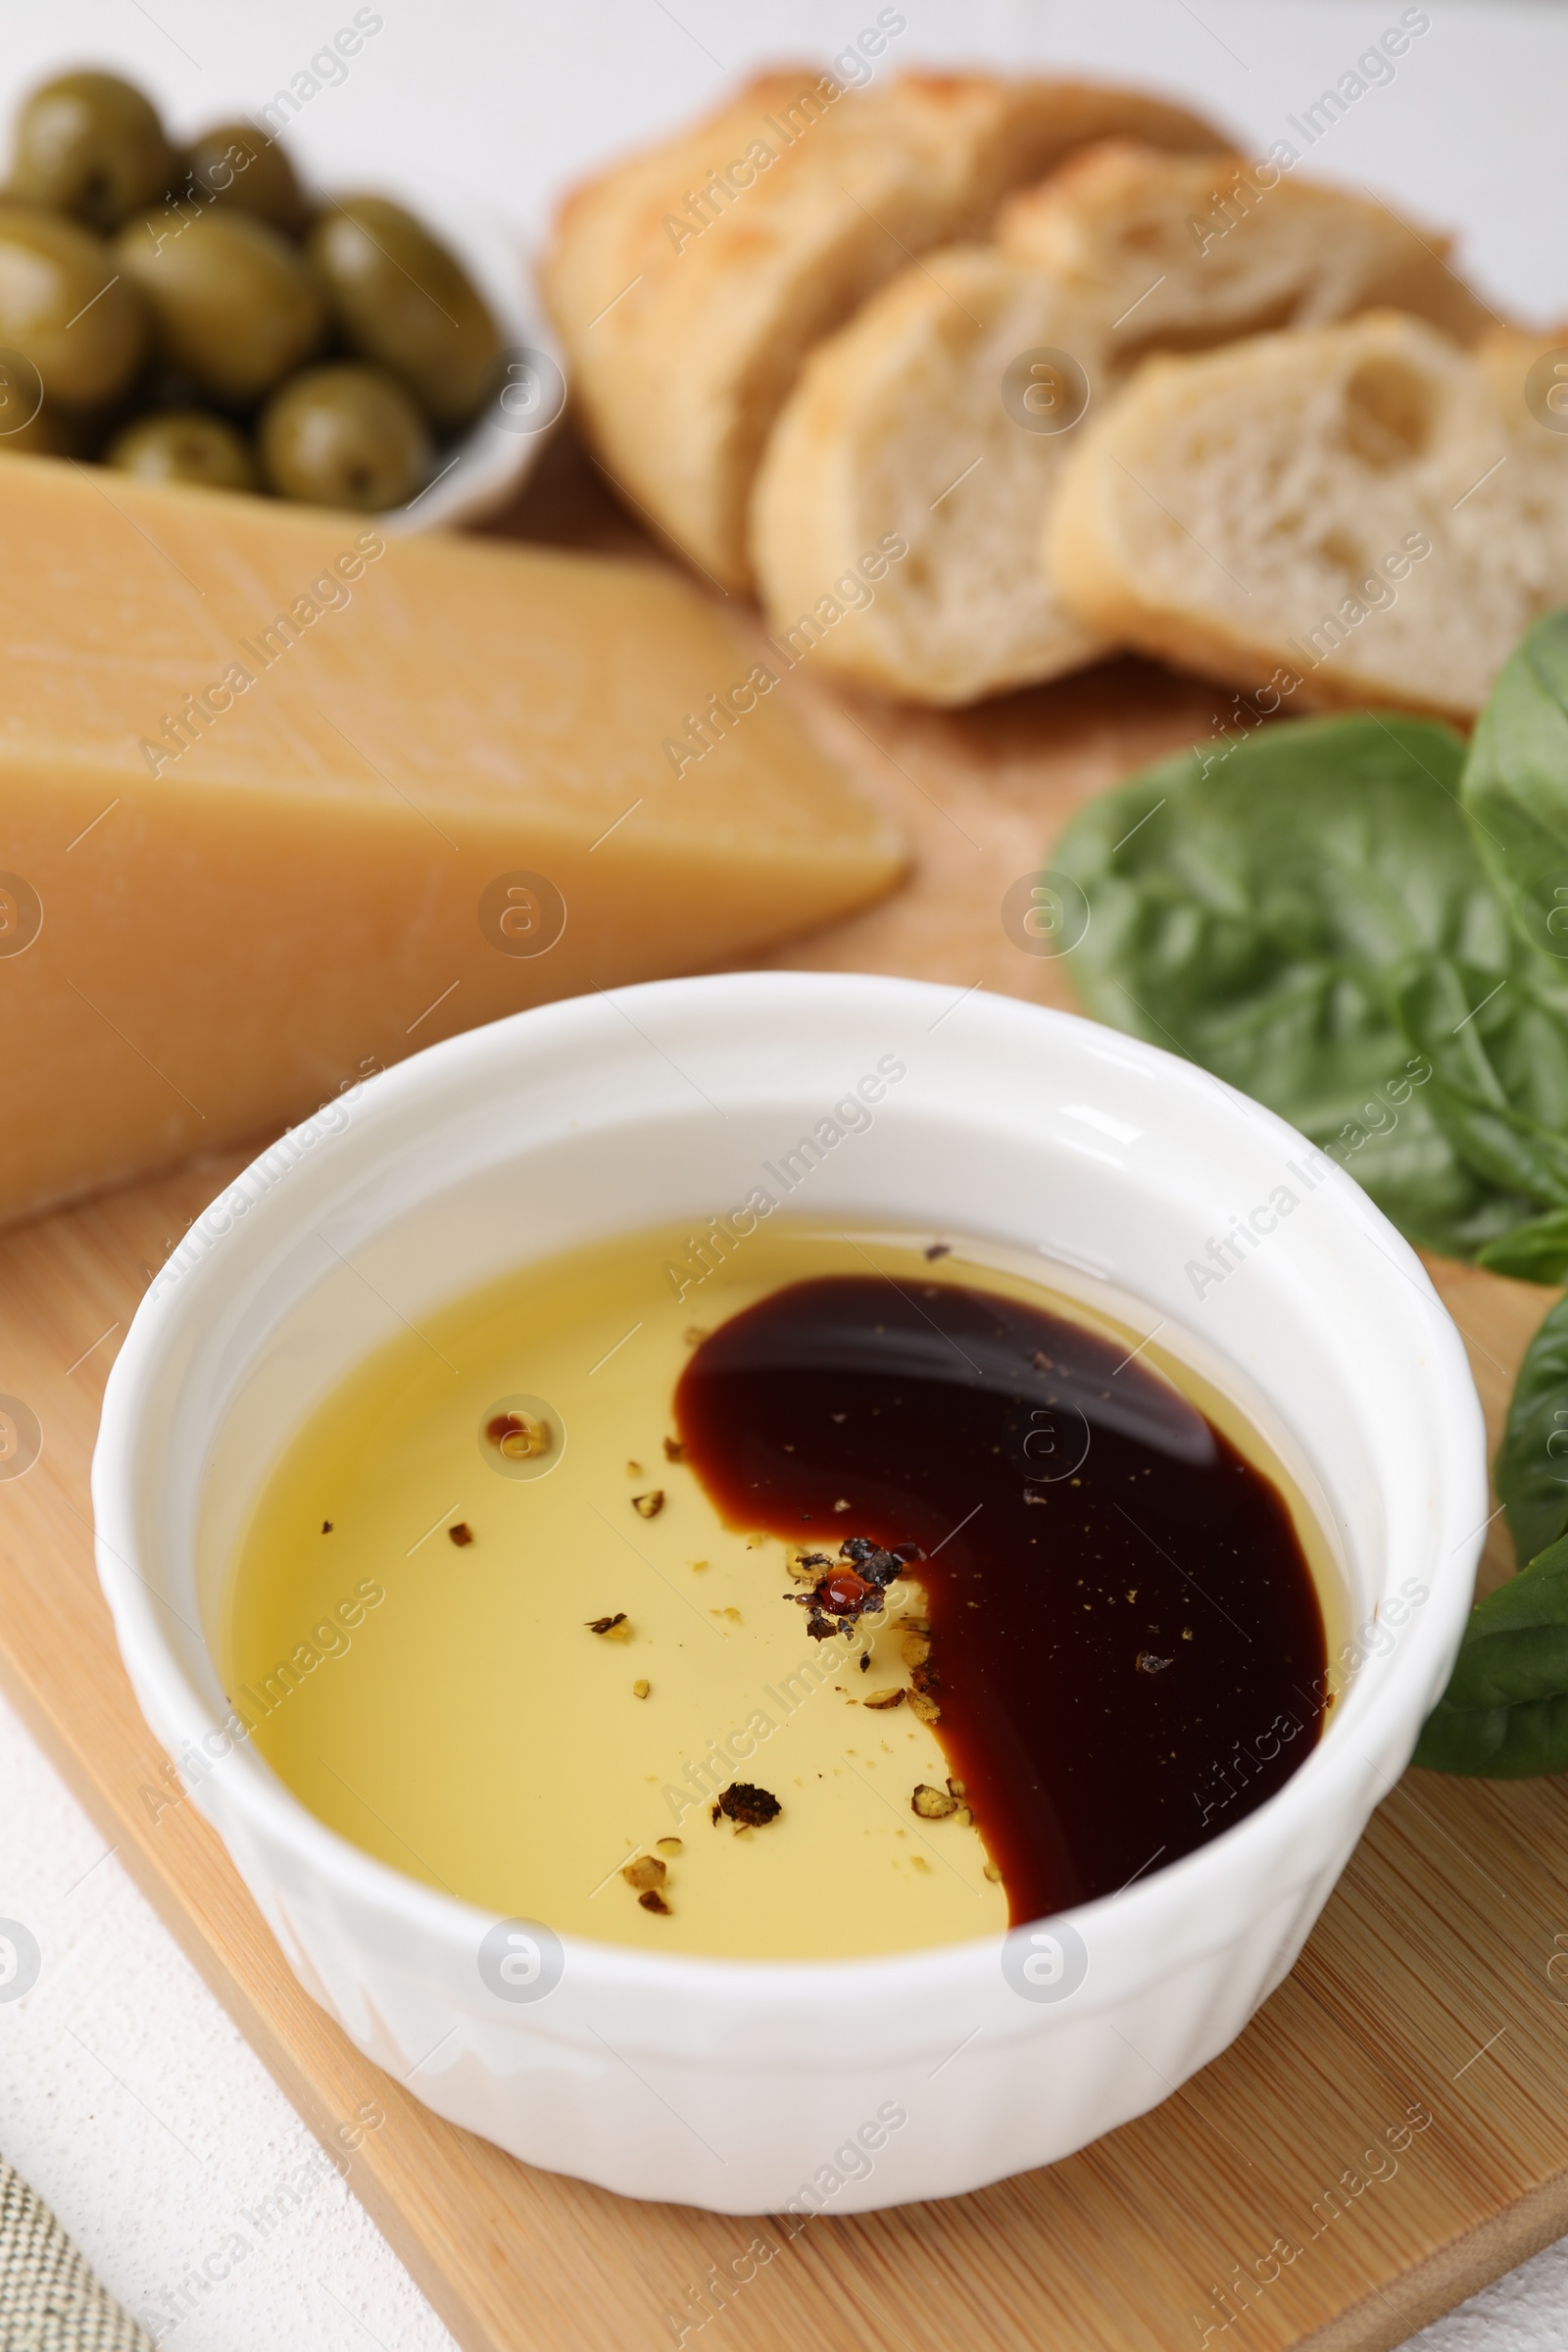 Photo of Bowl of organic balsamic vinegar with oil, basil and other products on table